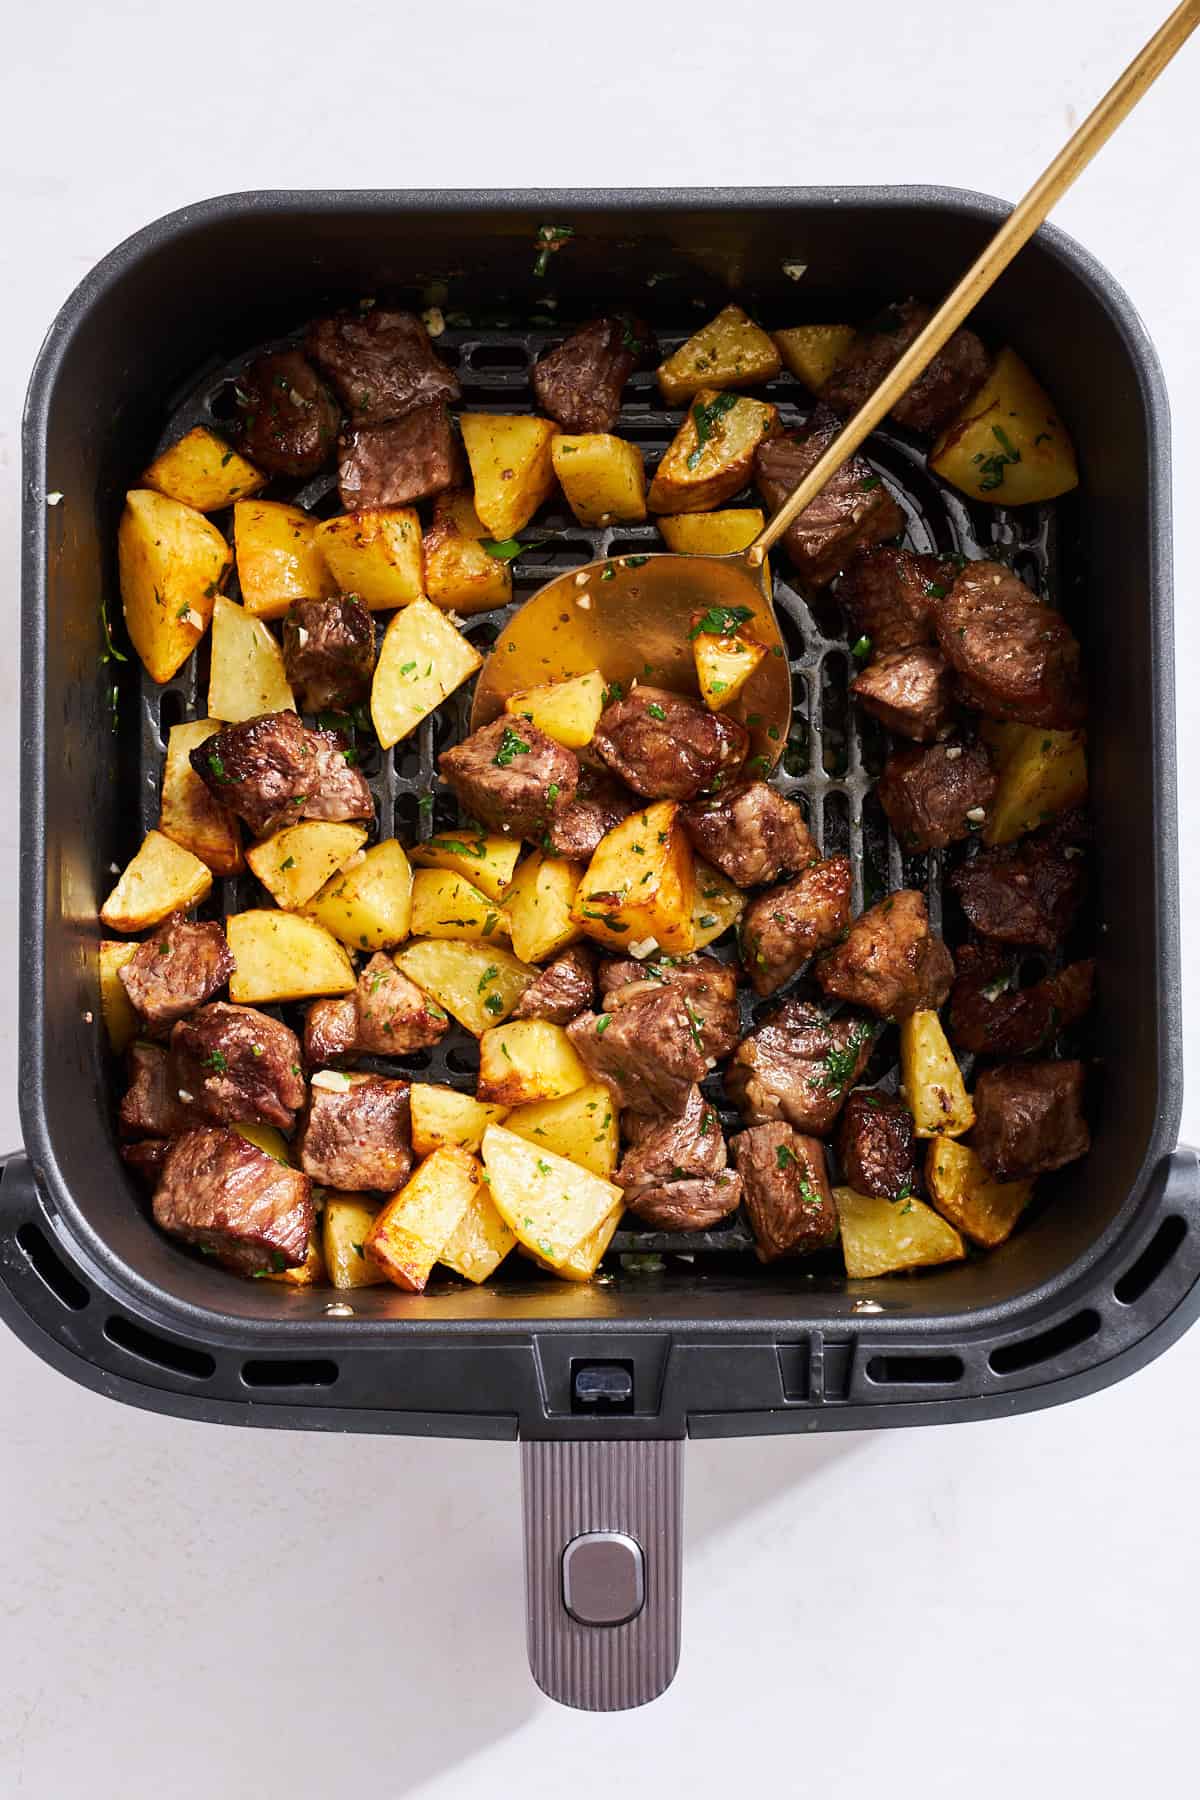 Cooked steak and potato pieces tossed with a garlic butter sauce in an air fryer. 